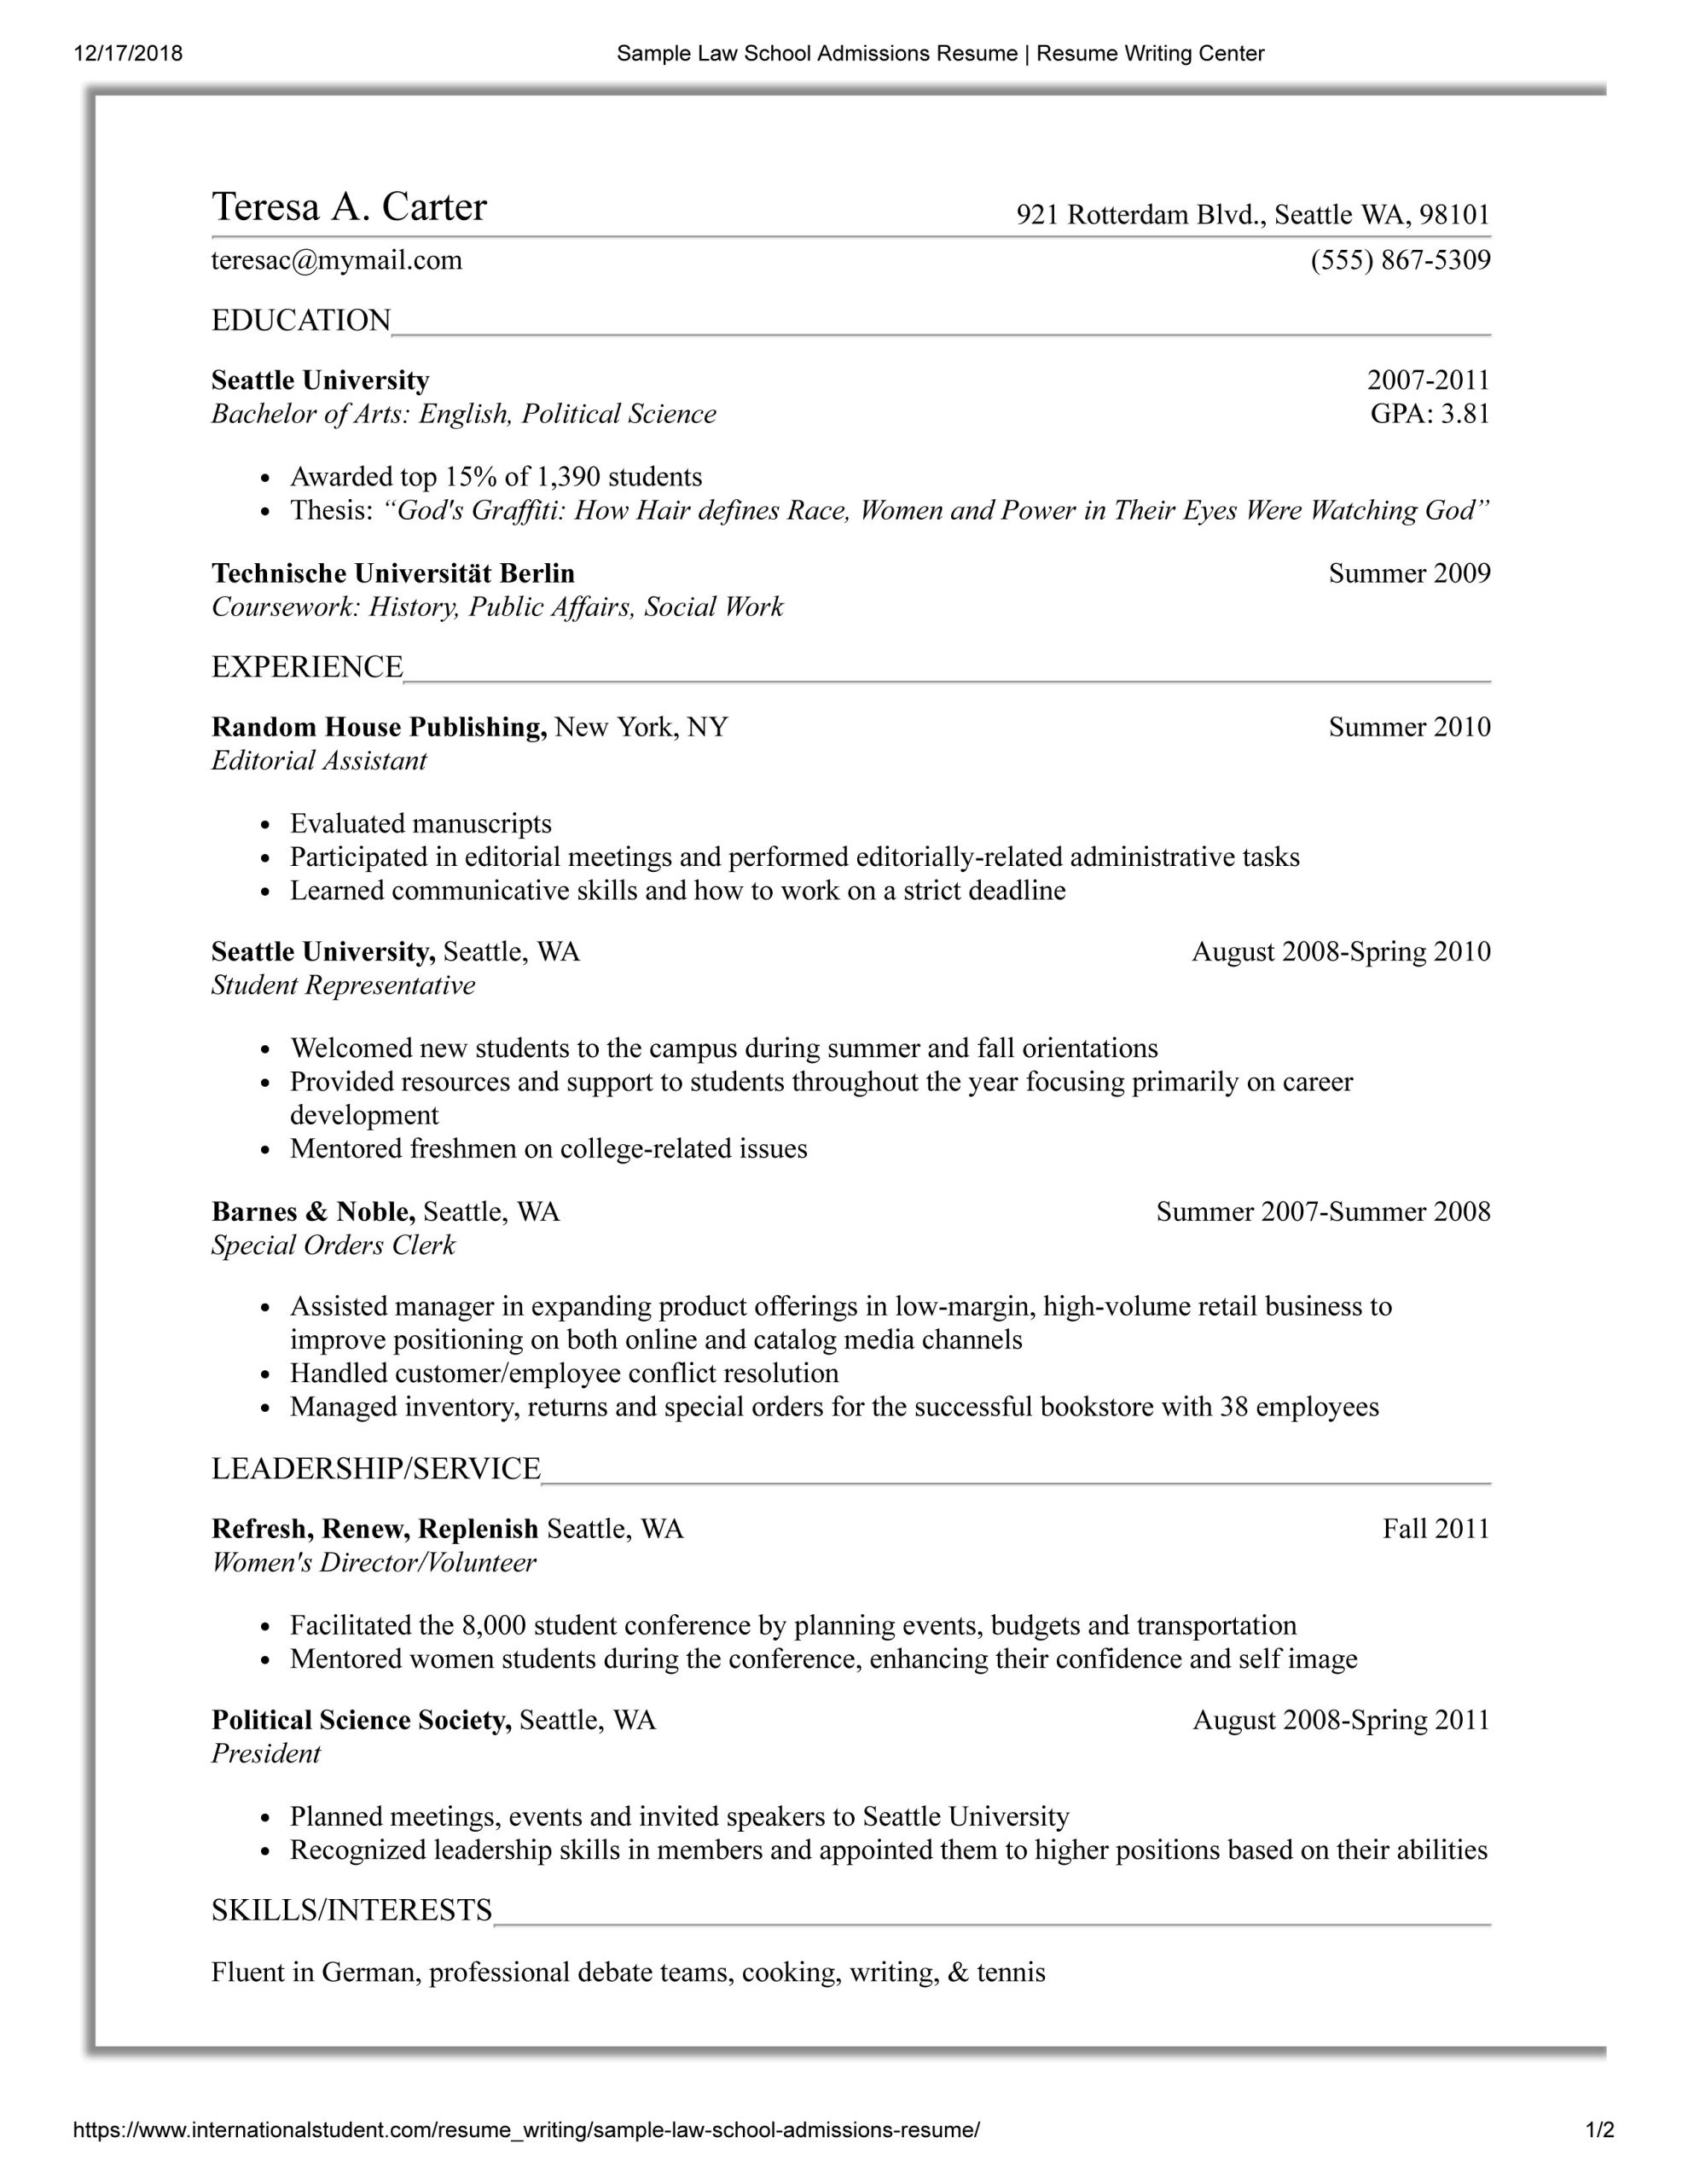 Sample Resume for Law School Professor 5 Law School Resume Templates: Prepping Your Resume for Law School …